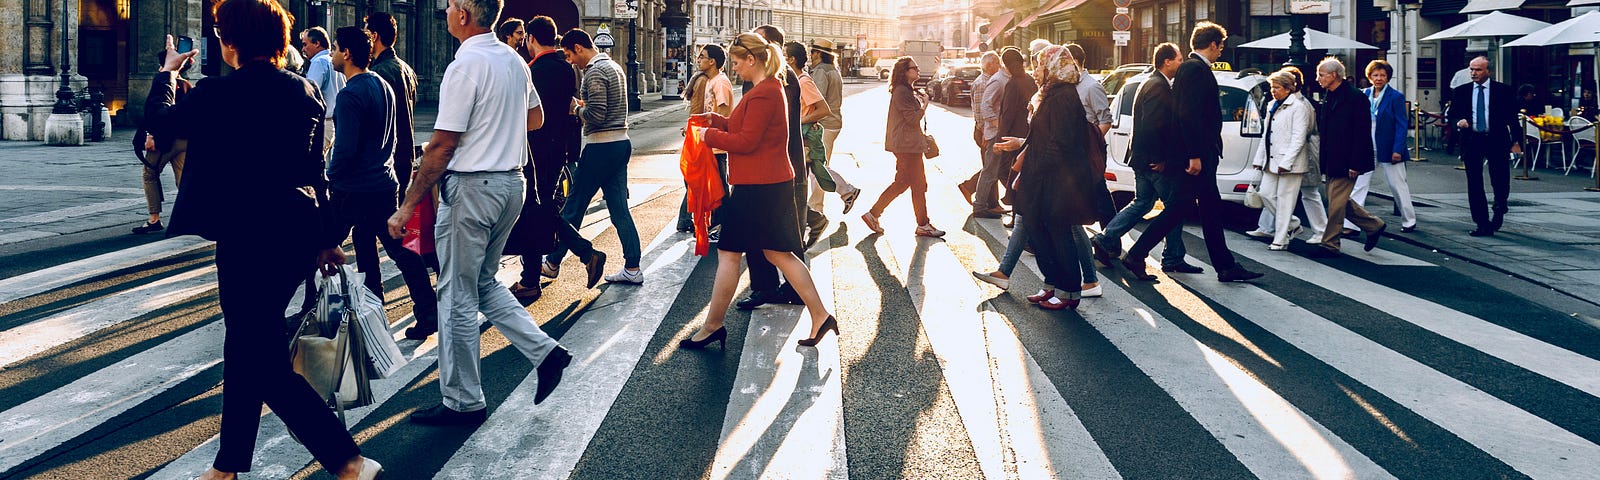 A busy street walking intersection filled with people. The Sun is rising or setting in the distance. City sprawls hide the nuances of the sun’s setting or rising; yet the abundance of people crossing the street remains.